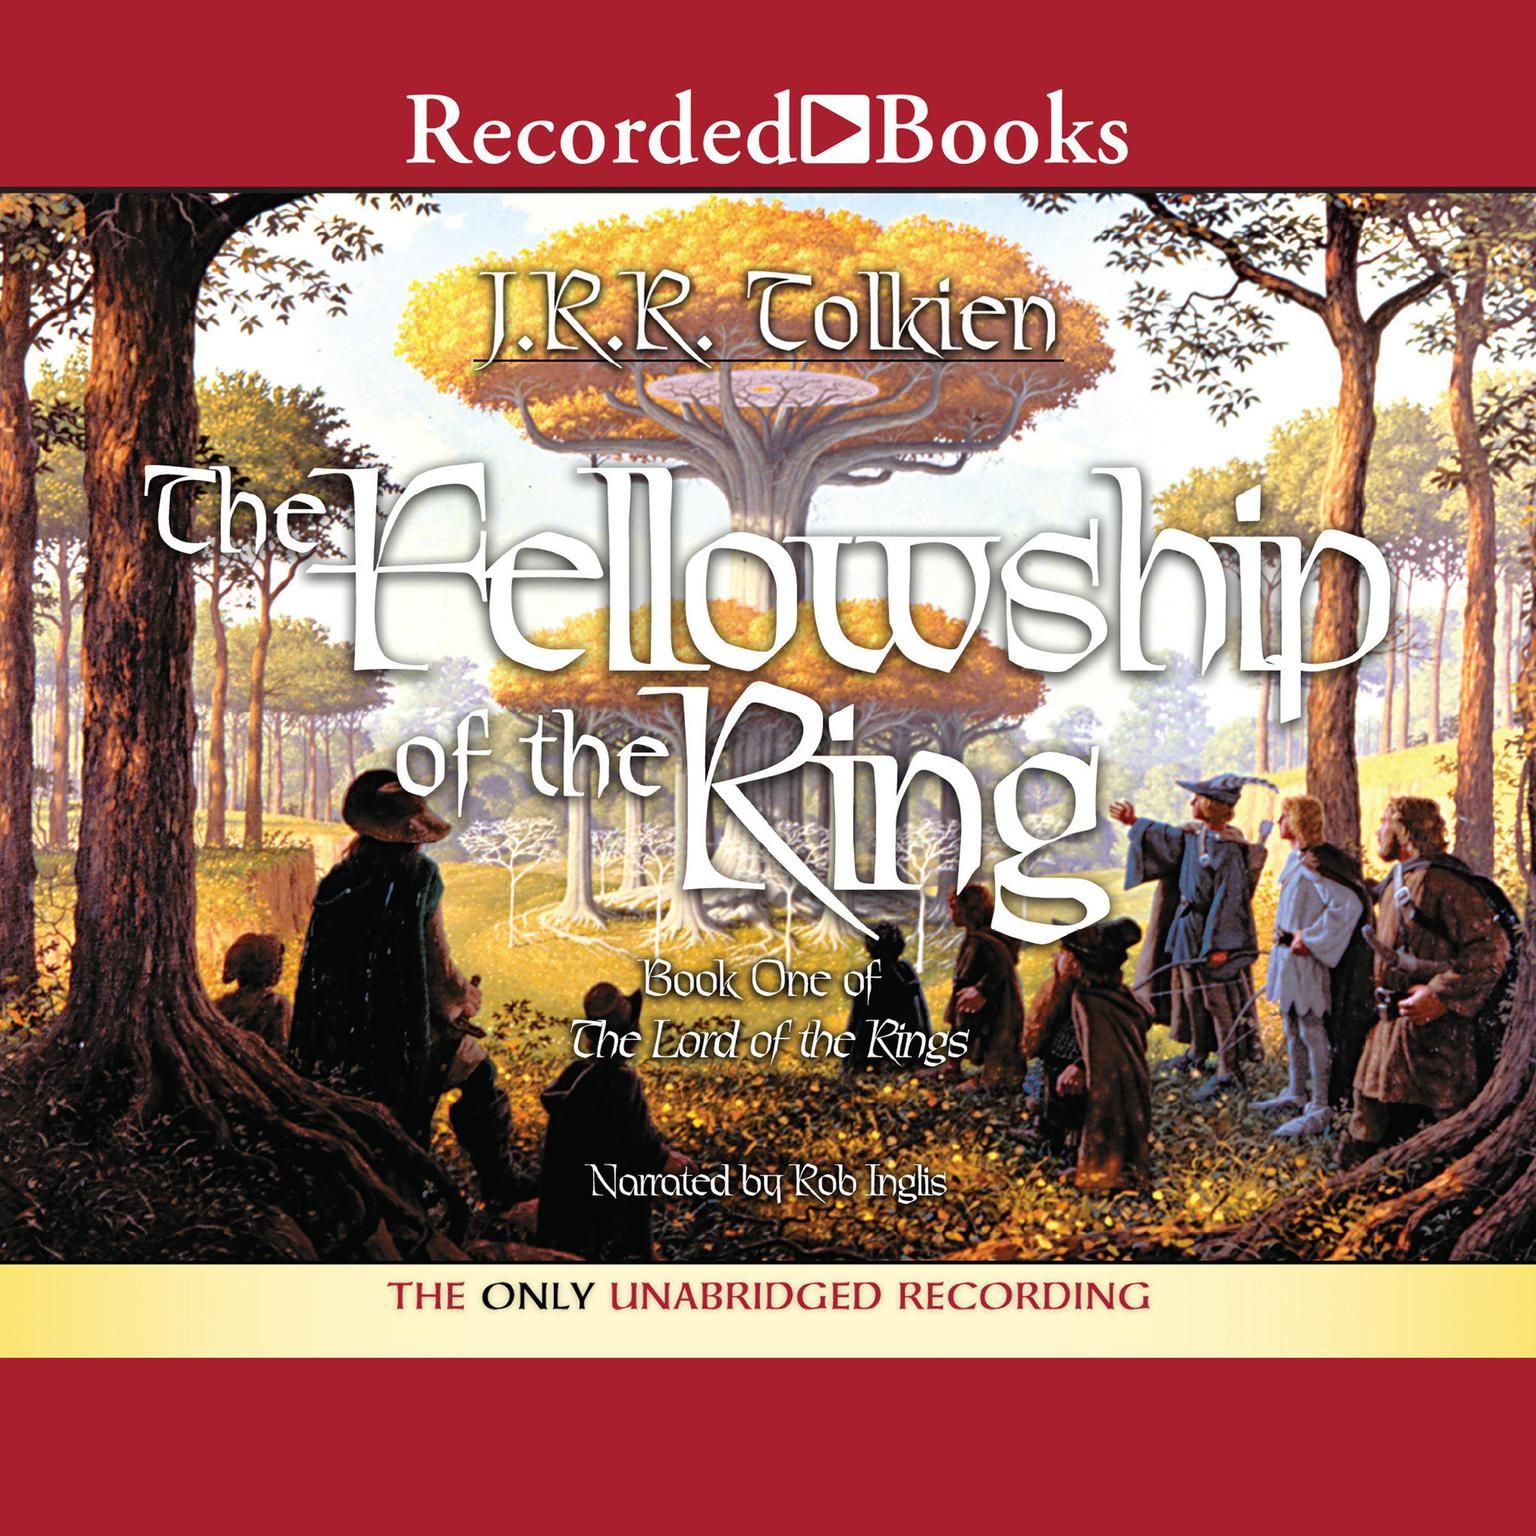 The Fellowship of the RIng audiobook cover narrated by Rob Ingles